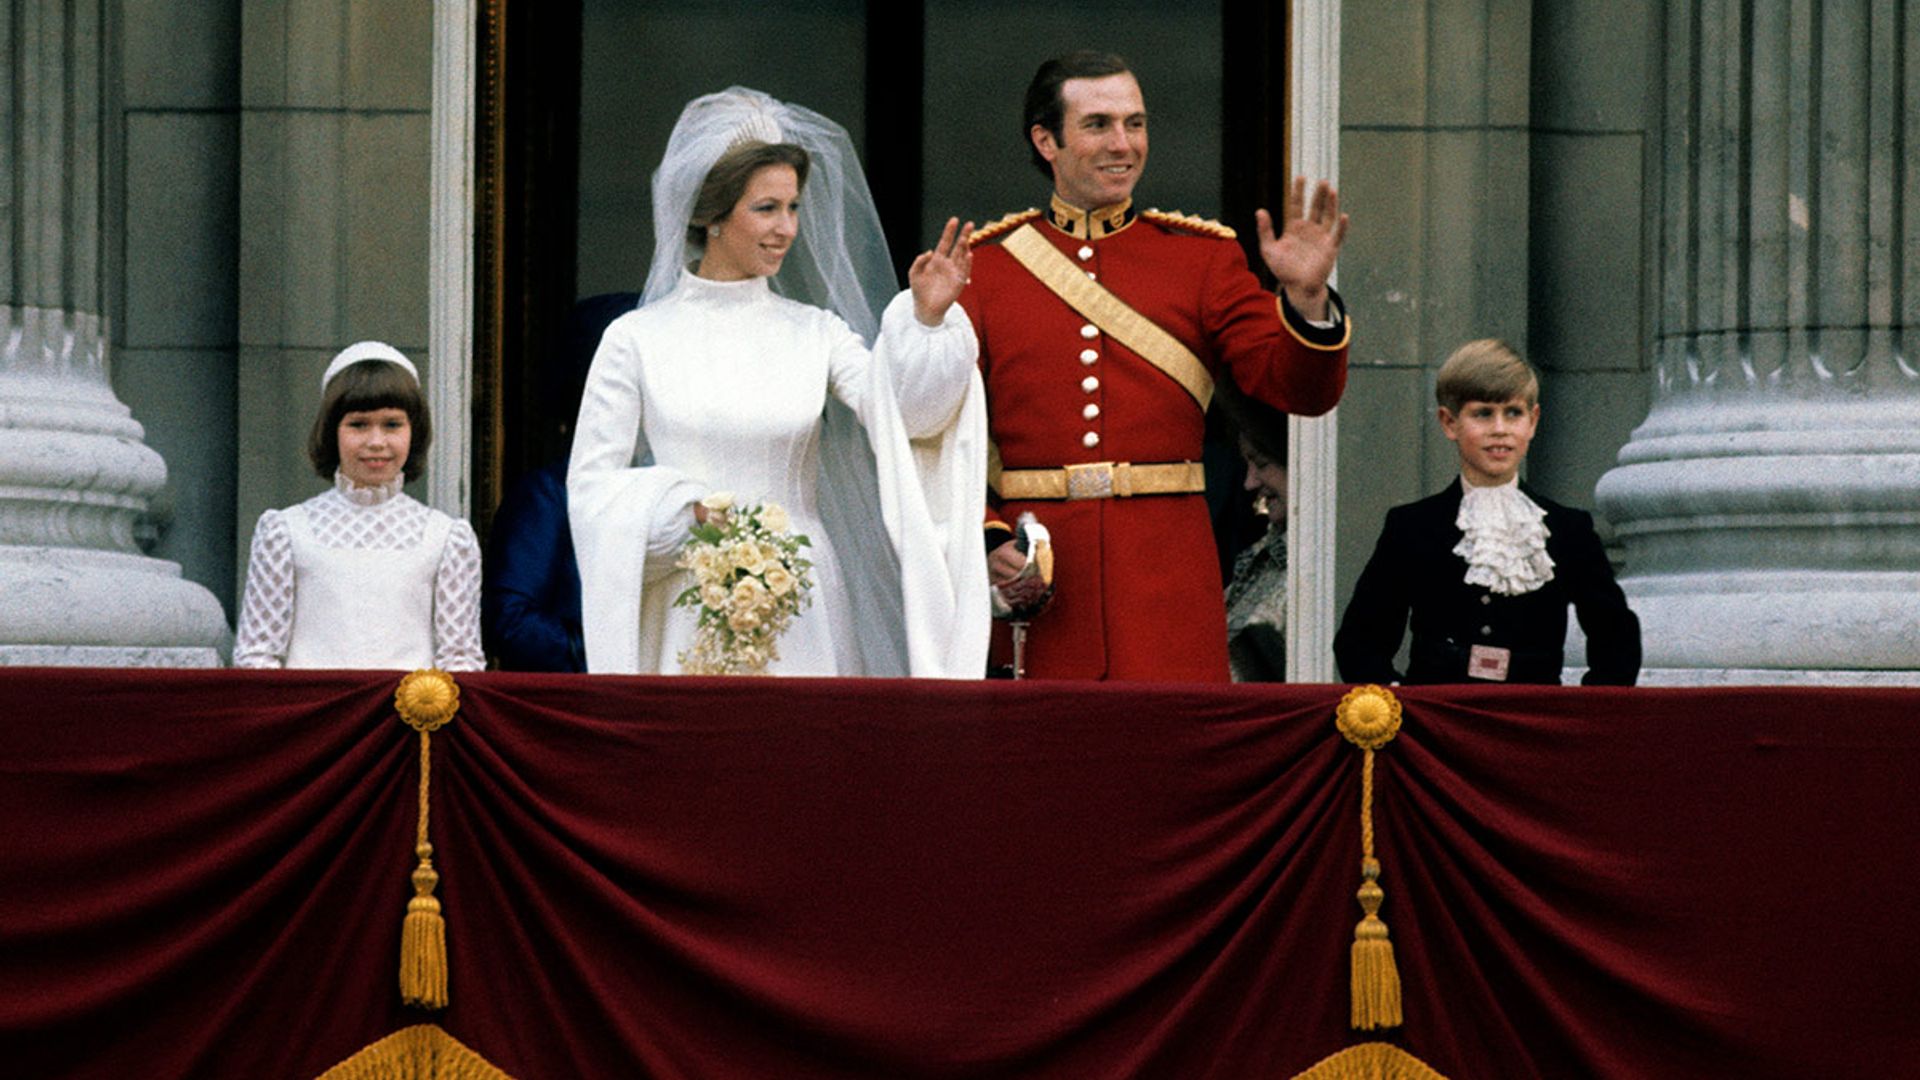 A slice of royal cake from Princess Anne's wedding in 1973 goes to auction